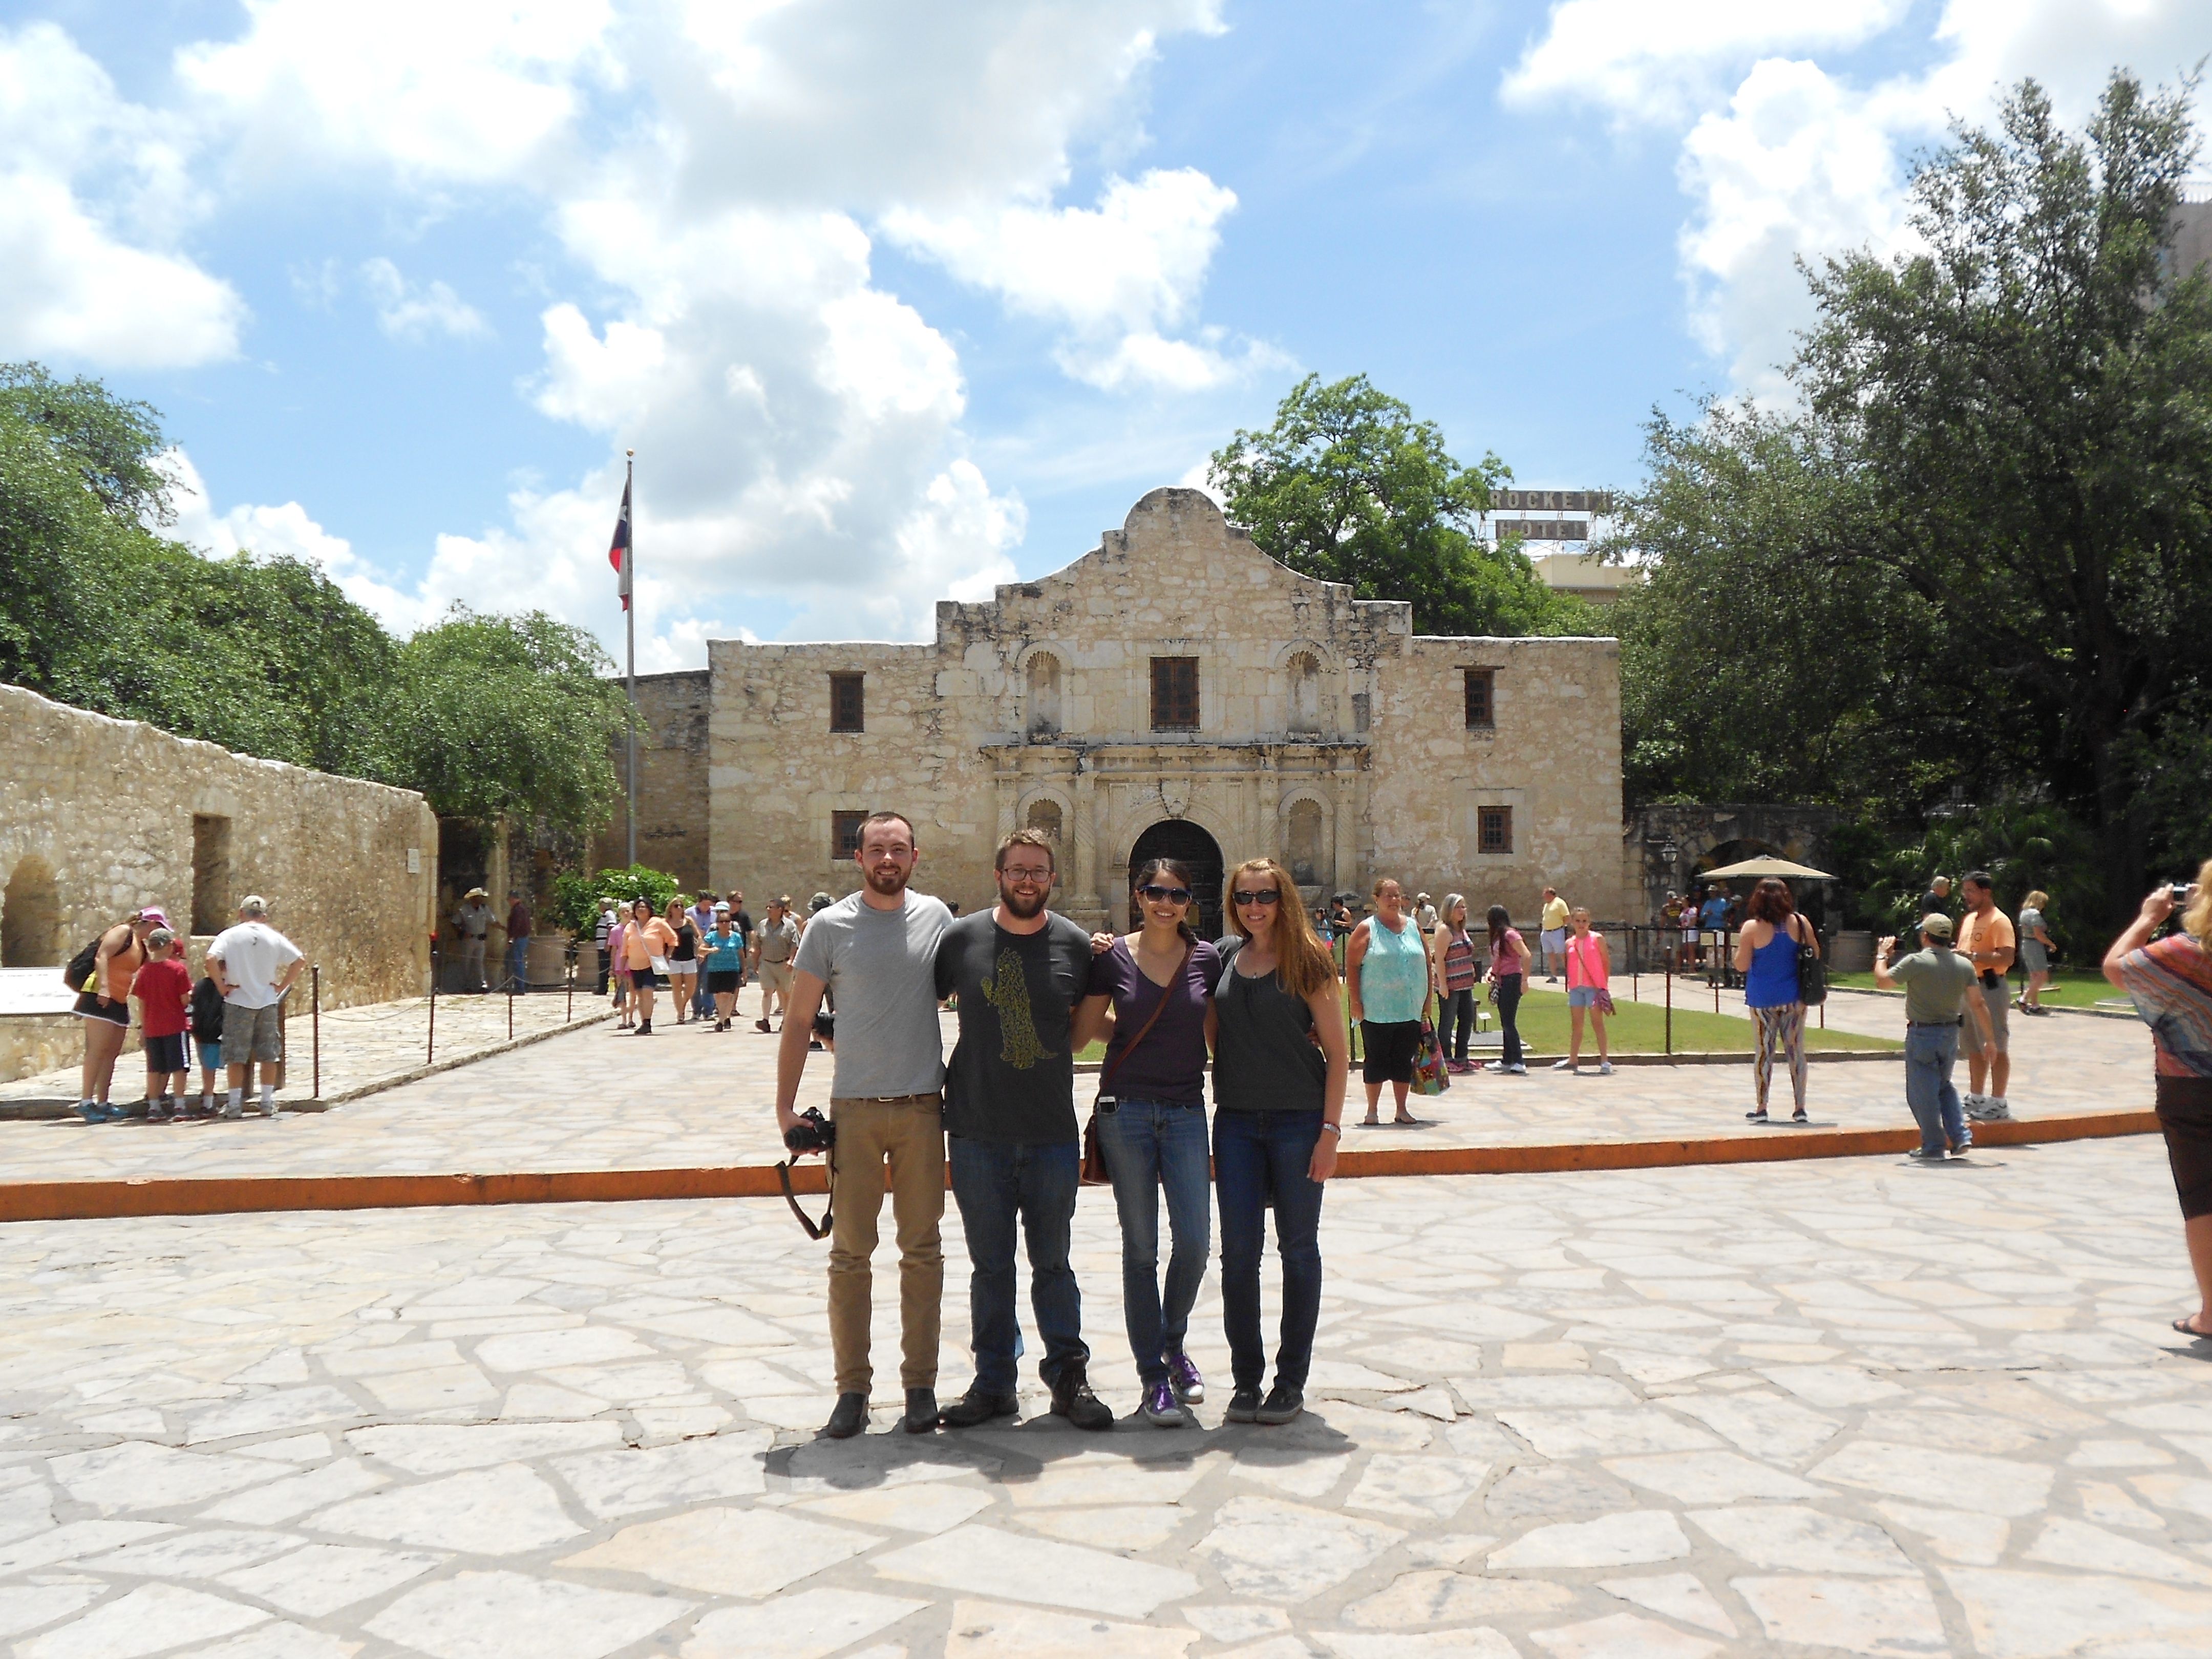 Group picture in front of the Alamo
